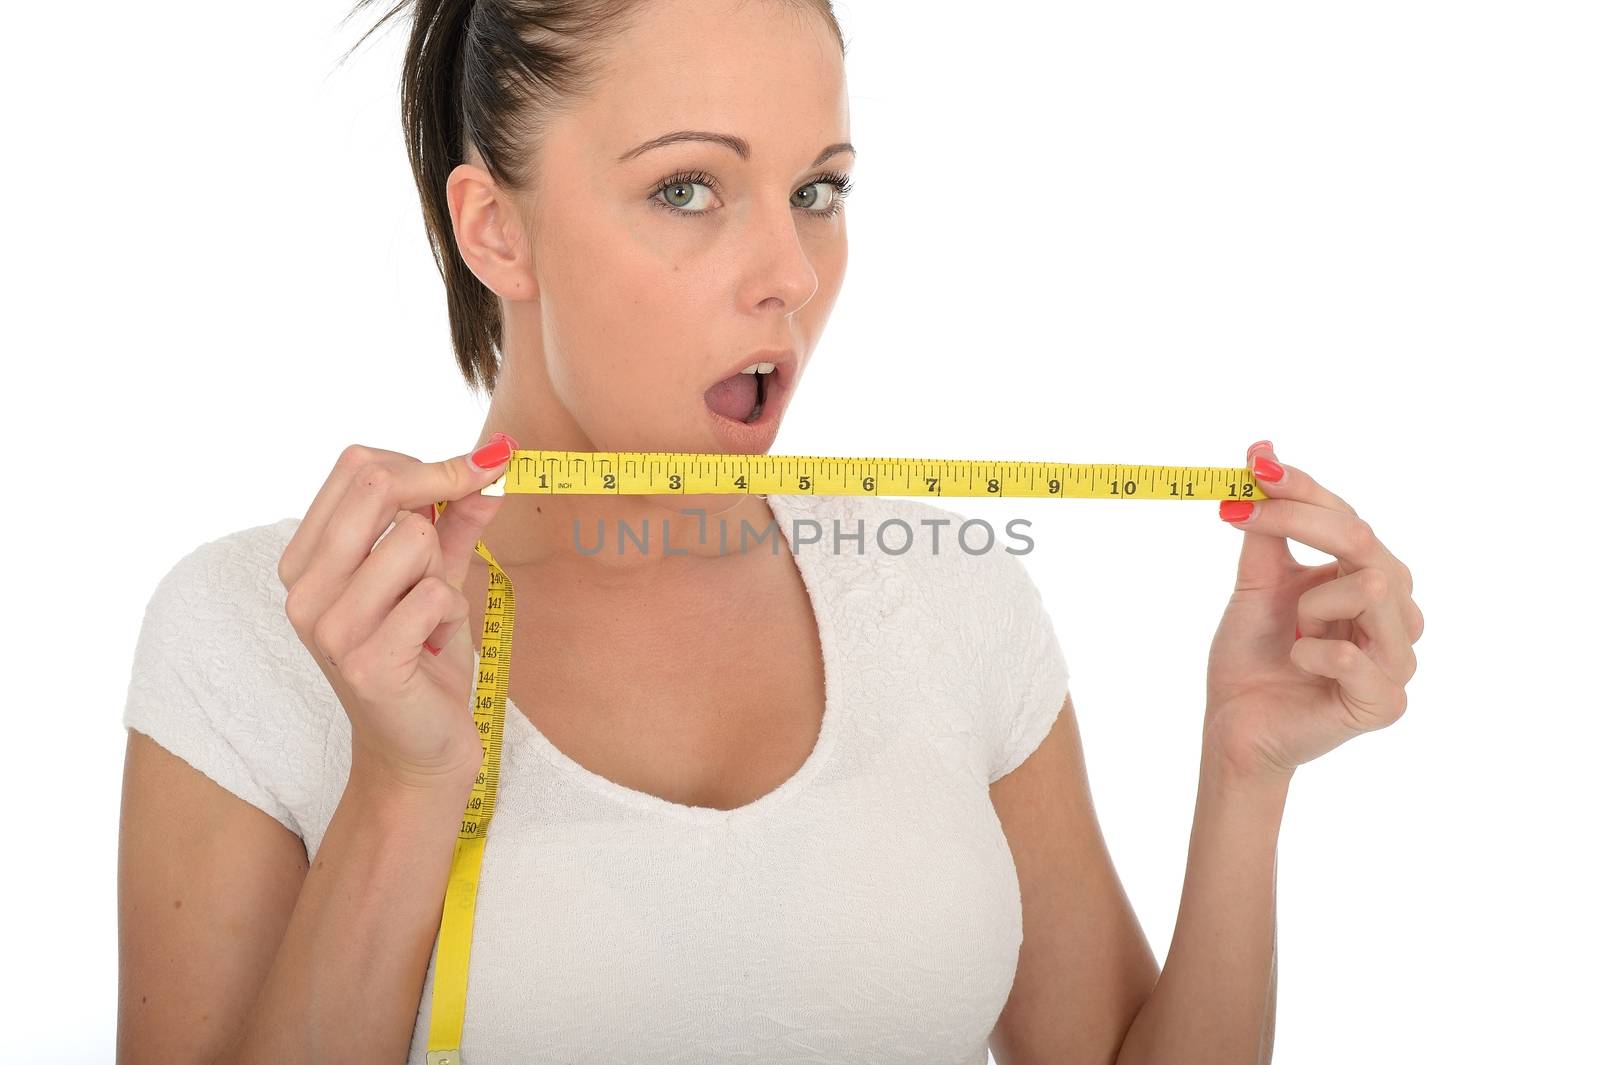 Healthy Young Woman Holding a Tape Measure by Whiteboxmedia